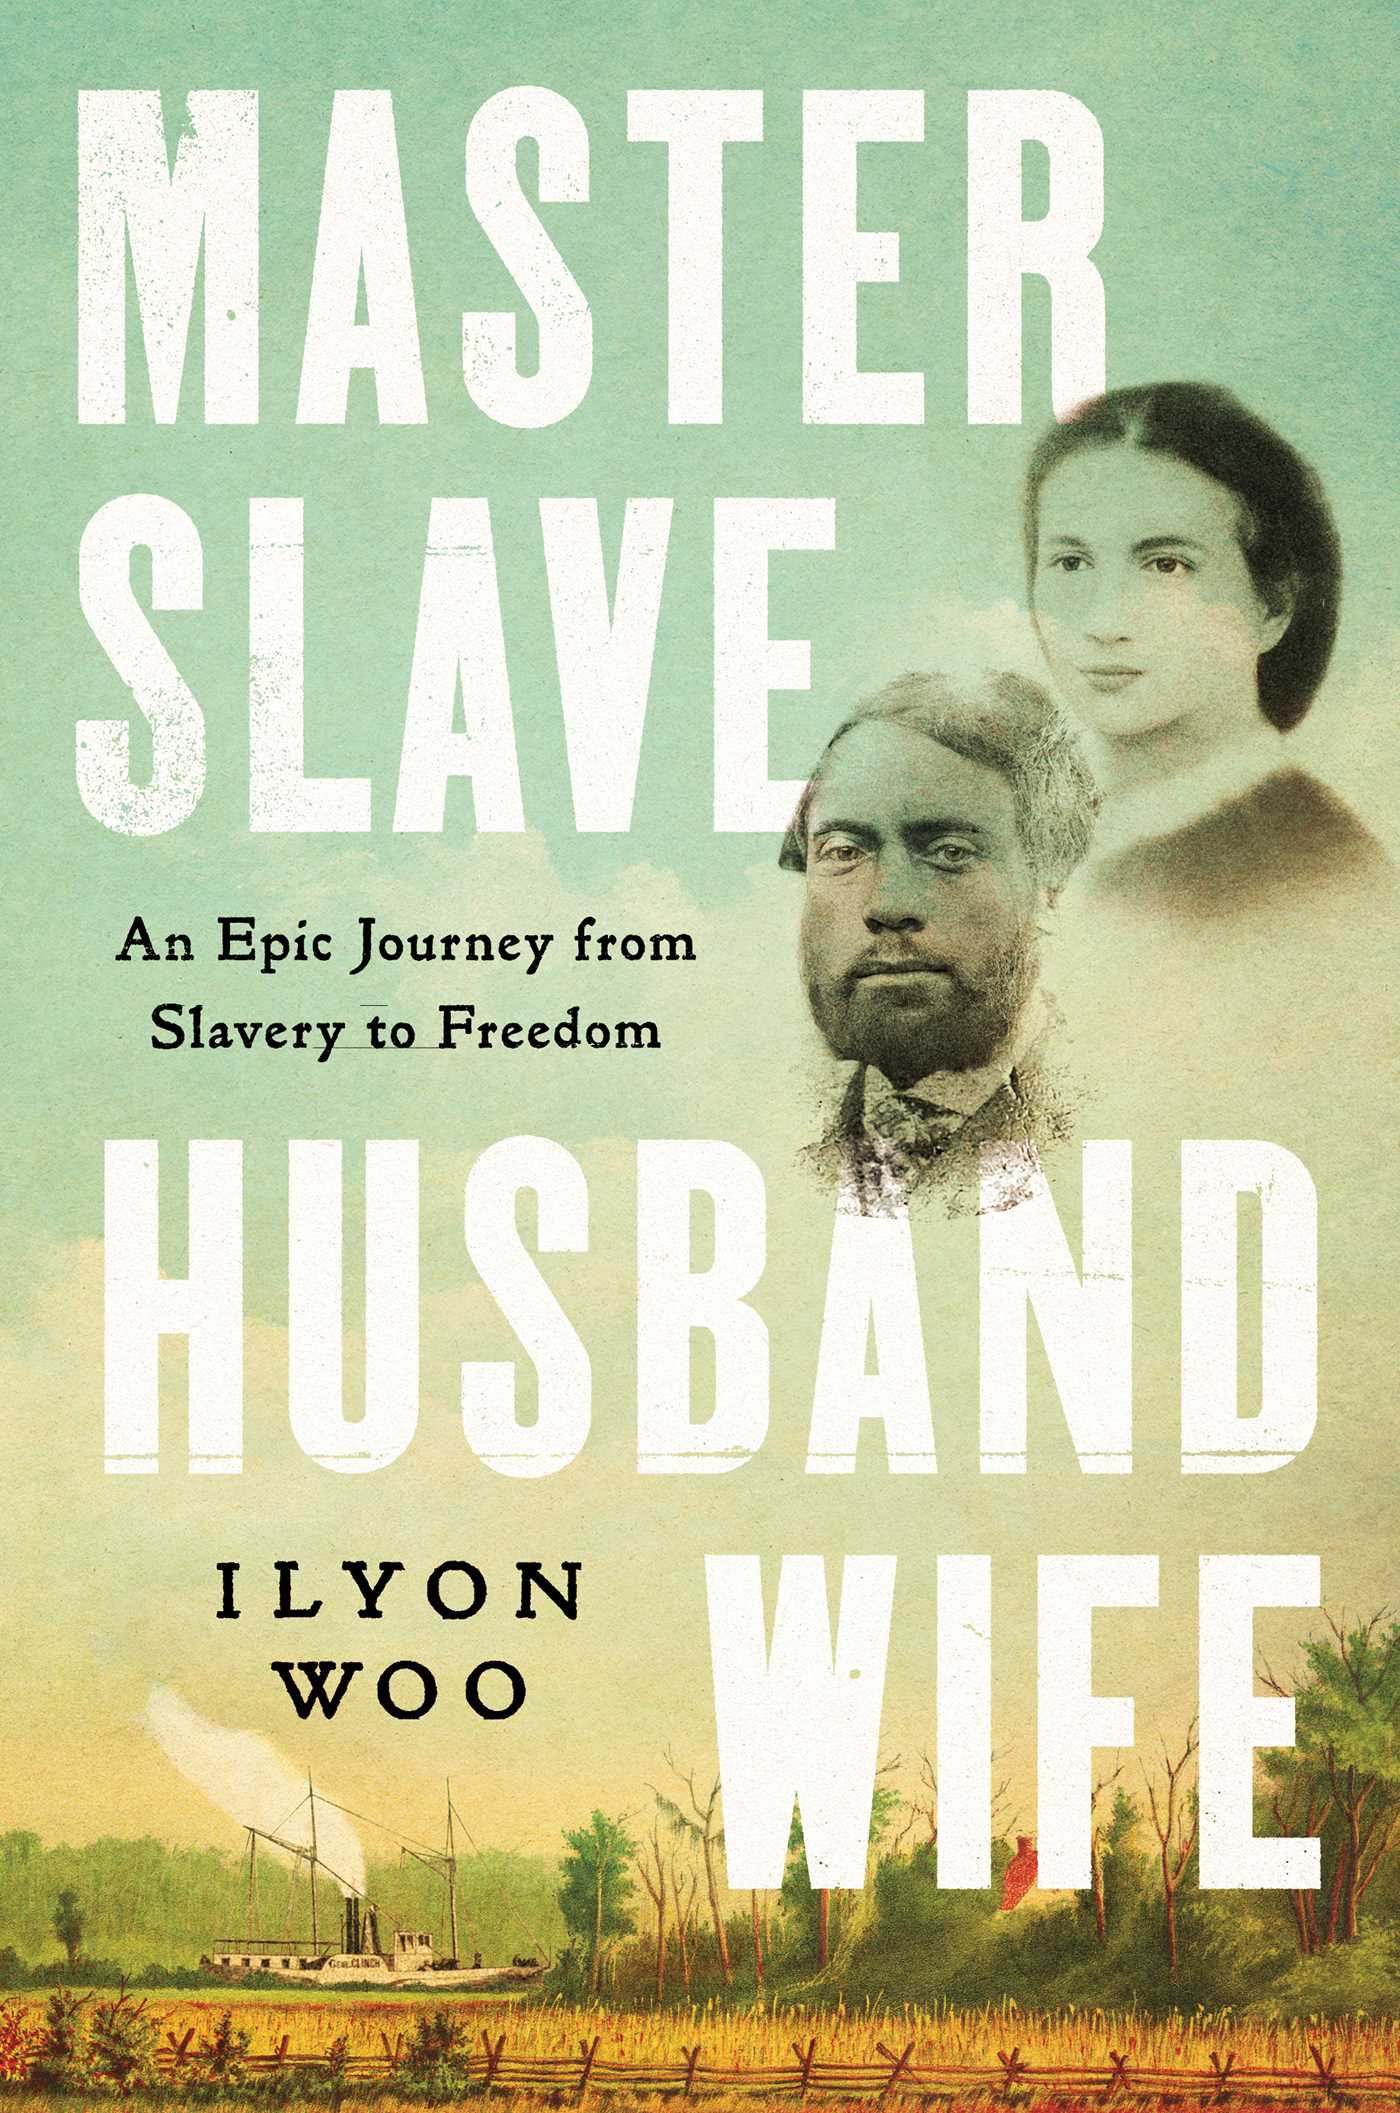 The cover for Master Slave Husband Wife by Ilyon Woo.